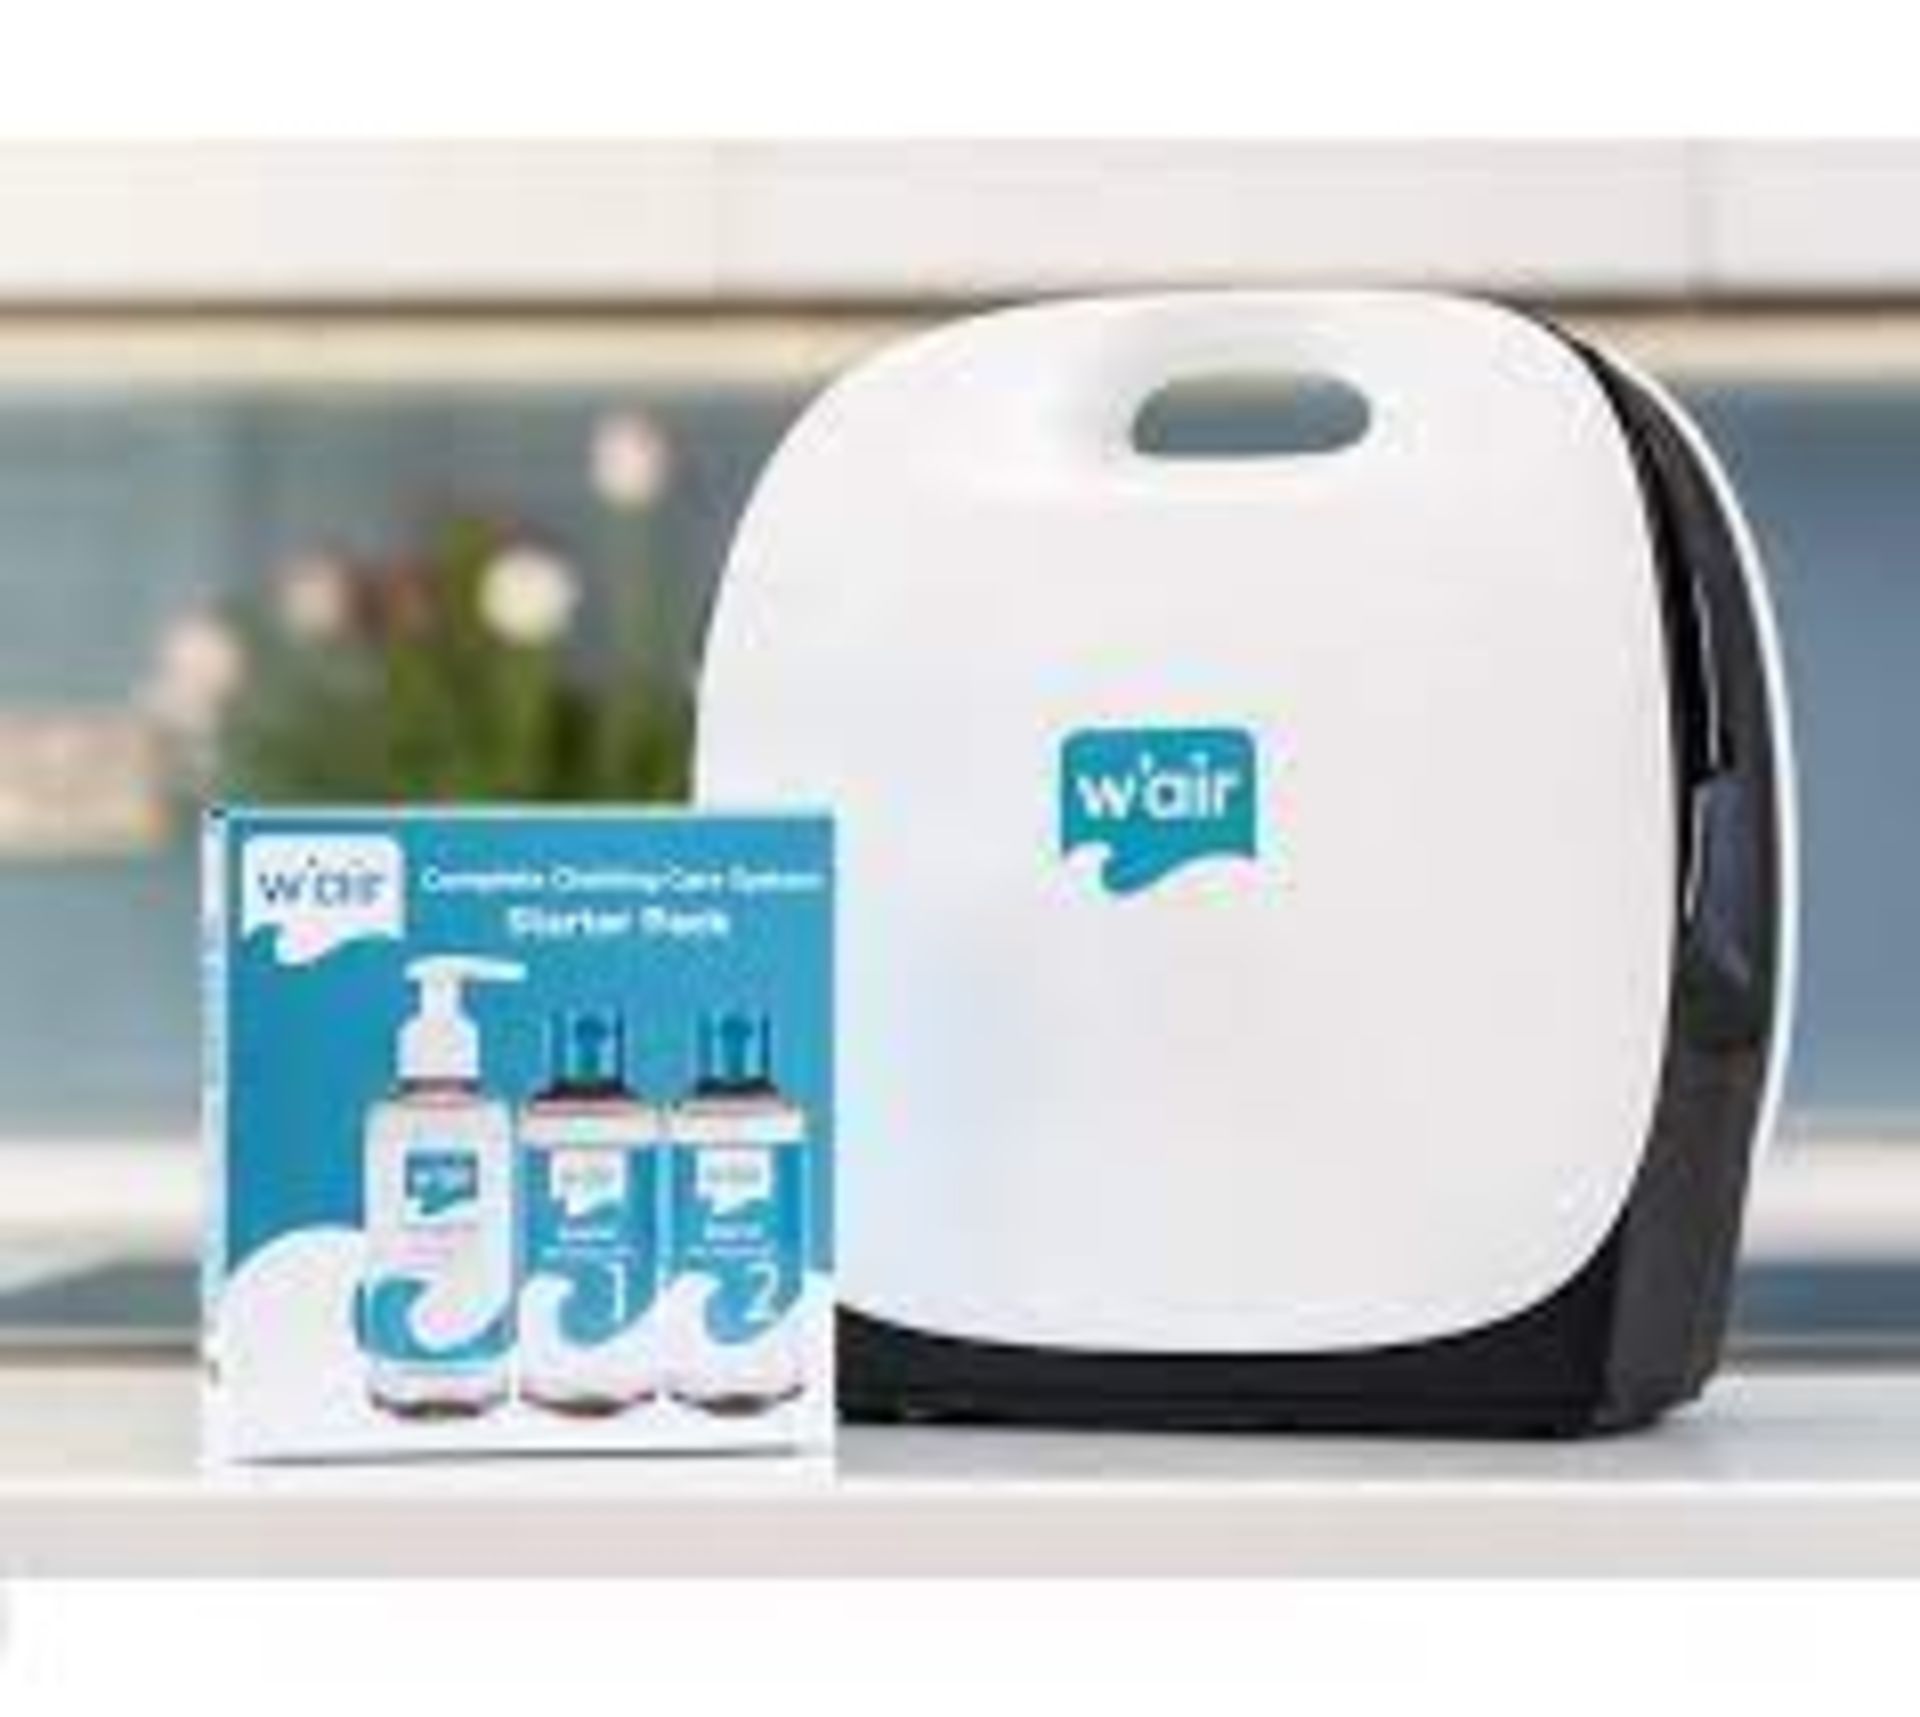 50 X BRAND NEW W'AIR SNEAKER CLEANING SYSTEMS RRP £299, The w'air uses hydrodynamic technology - Image 6 of 6